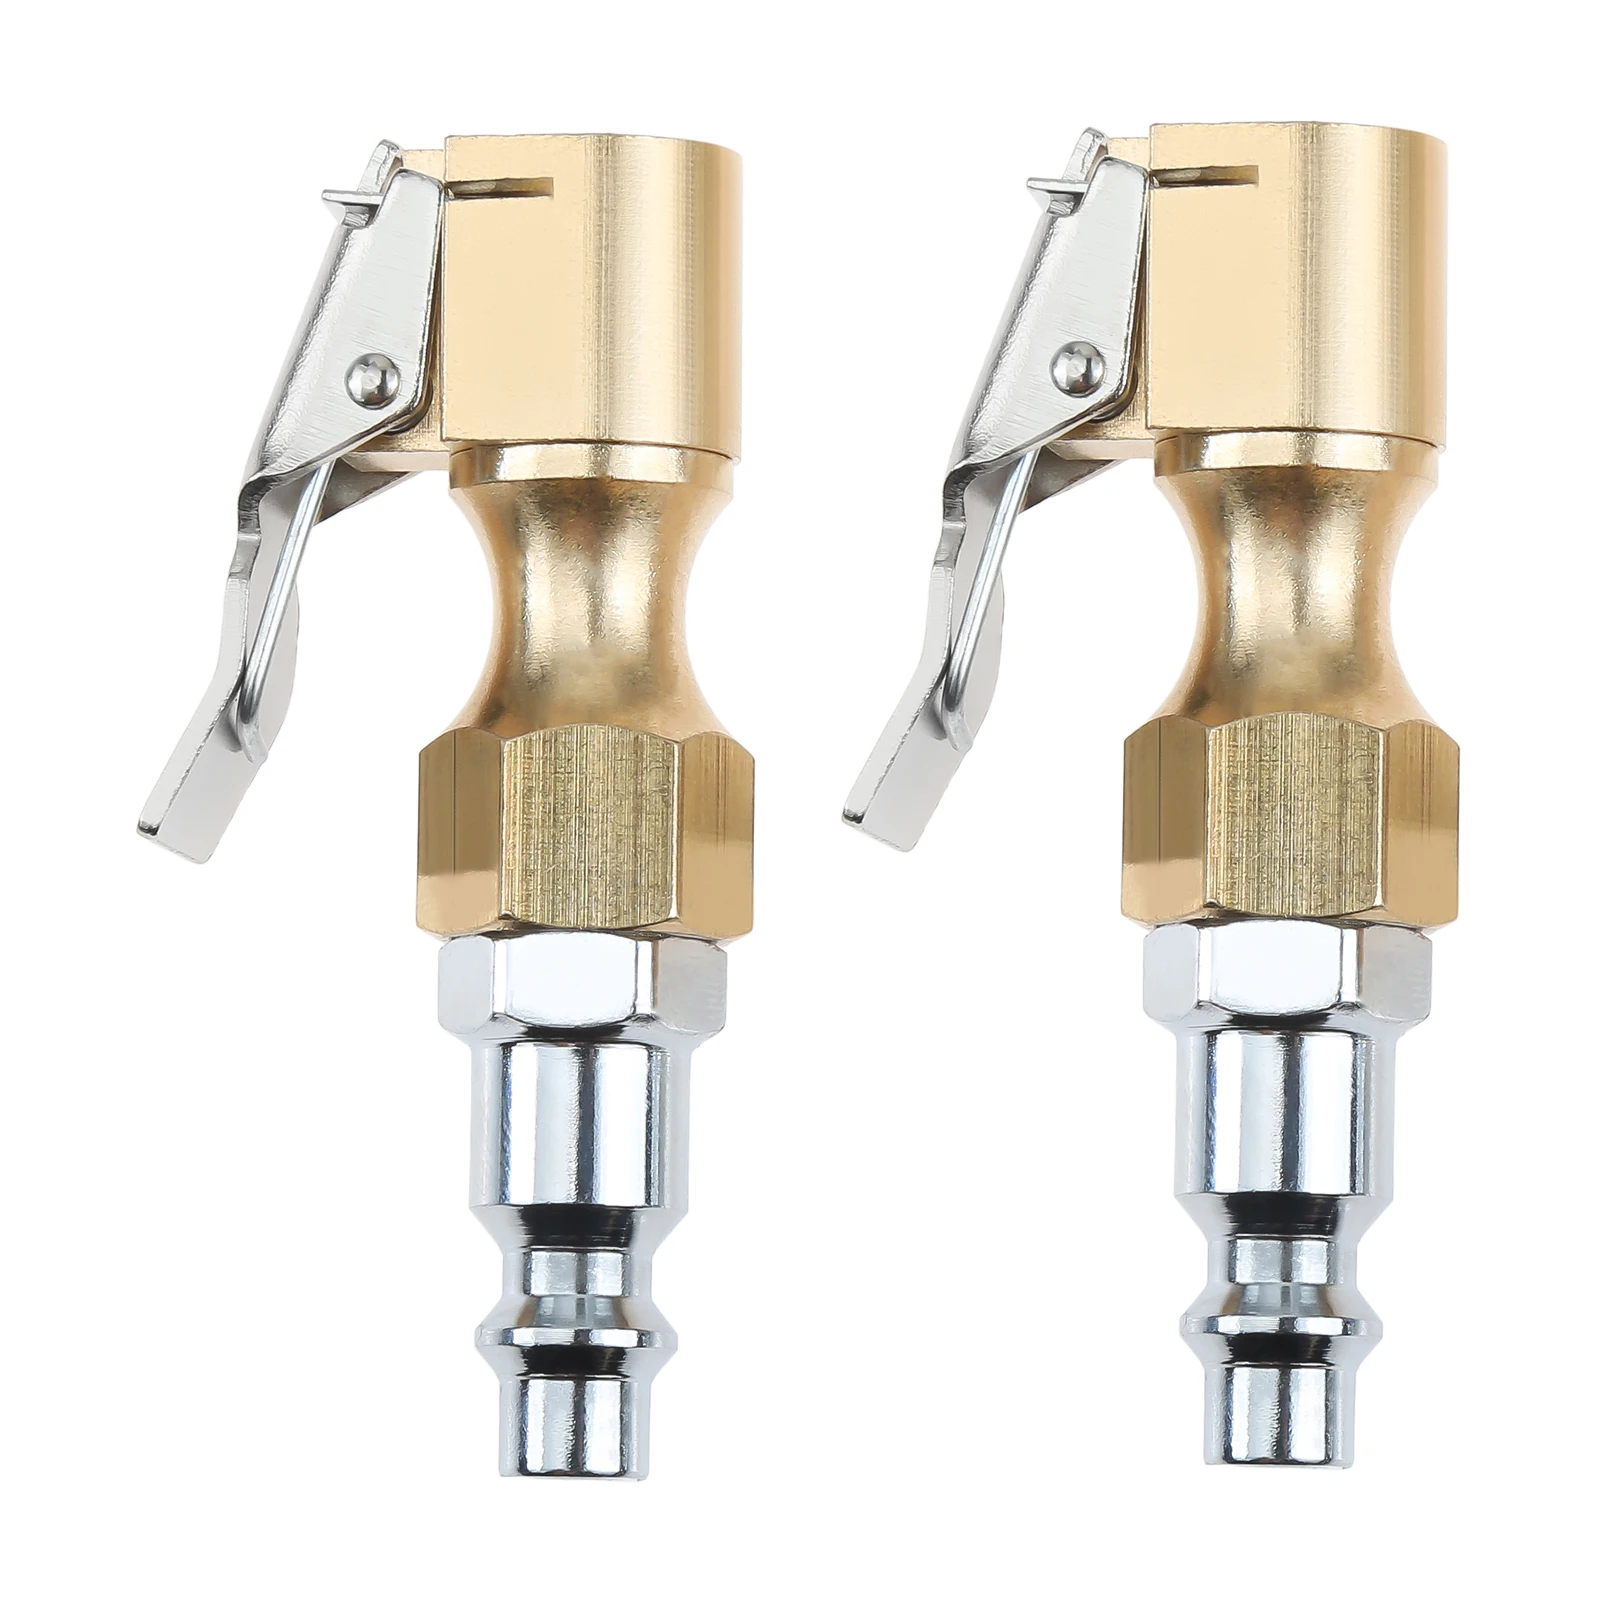 

2Pcs Brass Air Chuck Open Flow Lock On Tire Chuck with Clip for Inflator Gauge Compressor Accessories